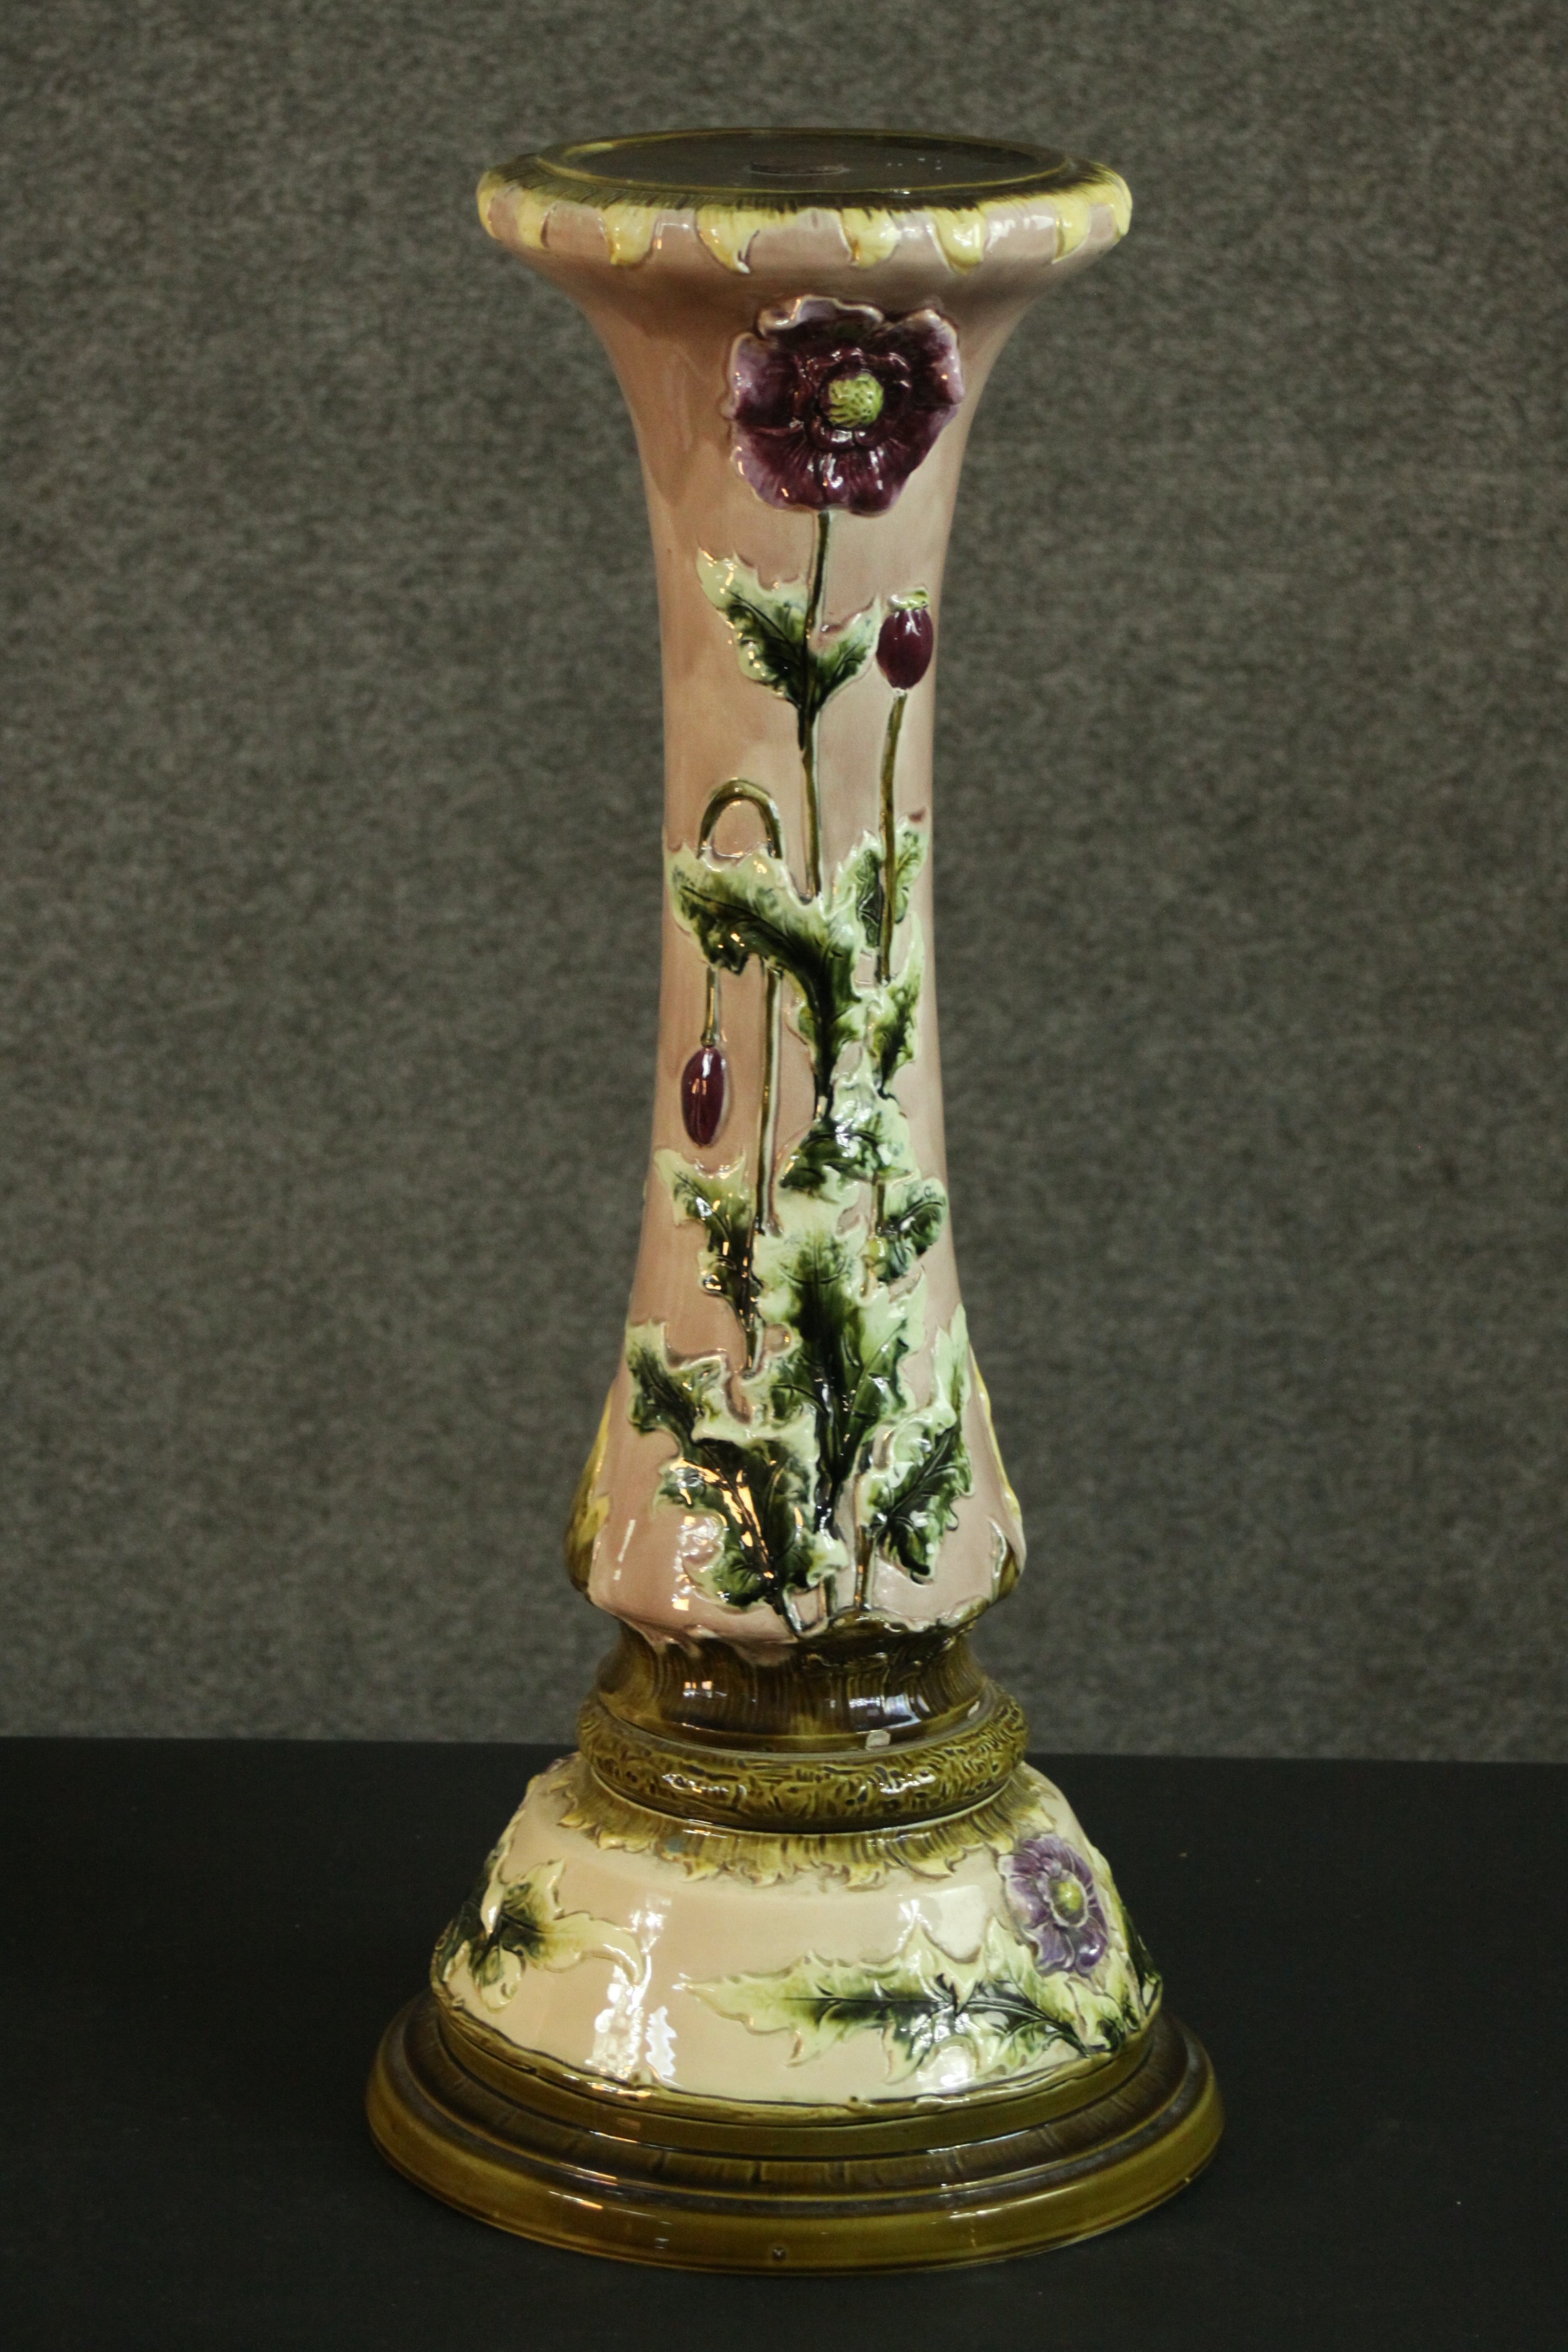 An early 20th century relief poppy design ceramic planter stand on cream ground and green detailing.